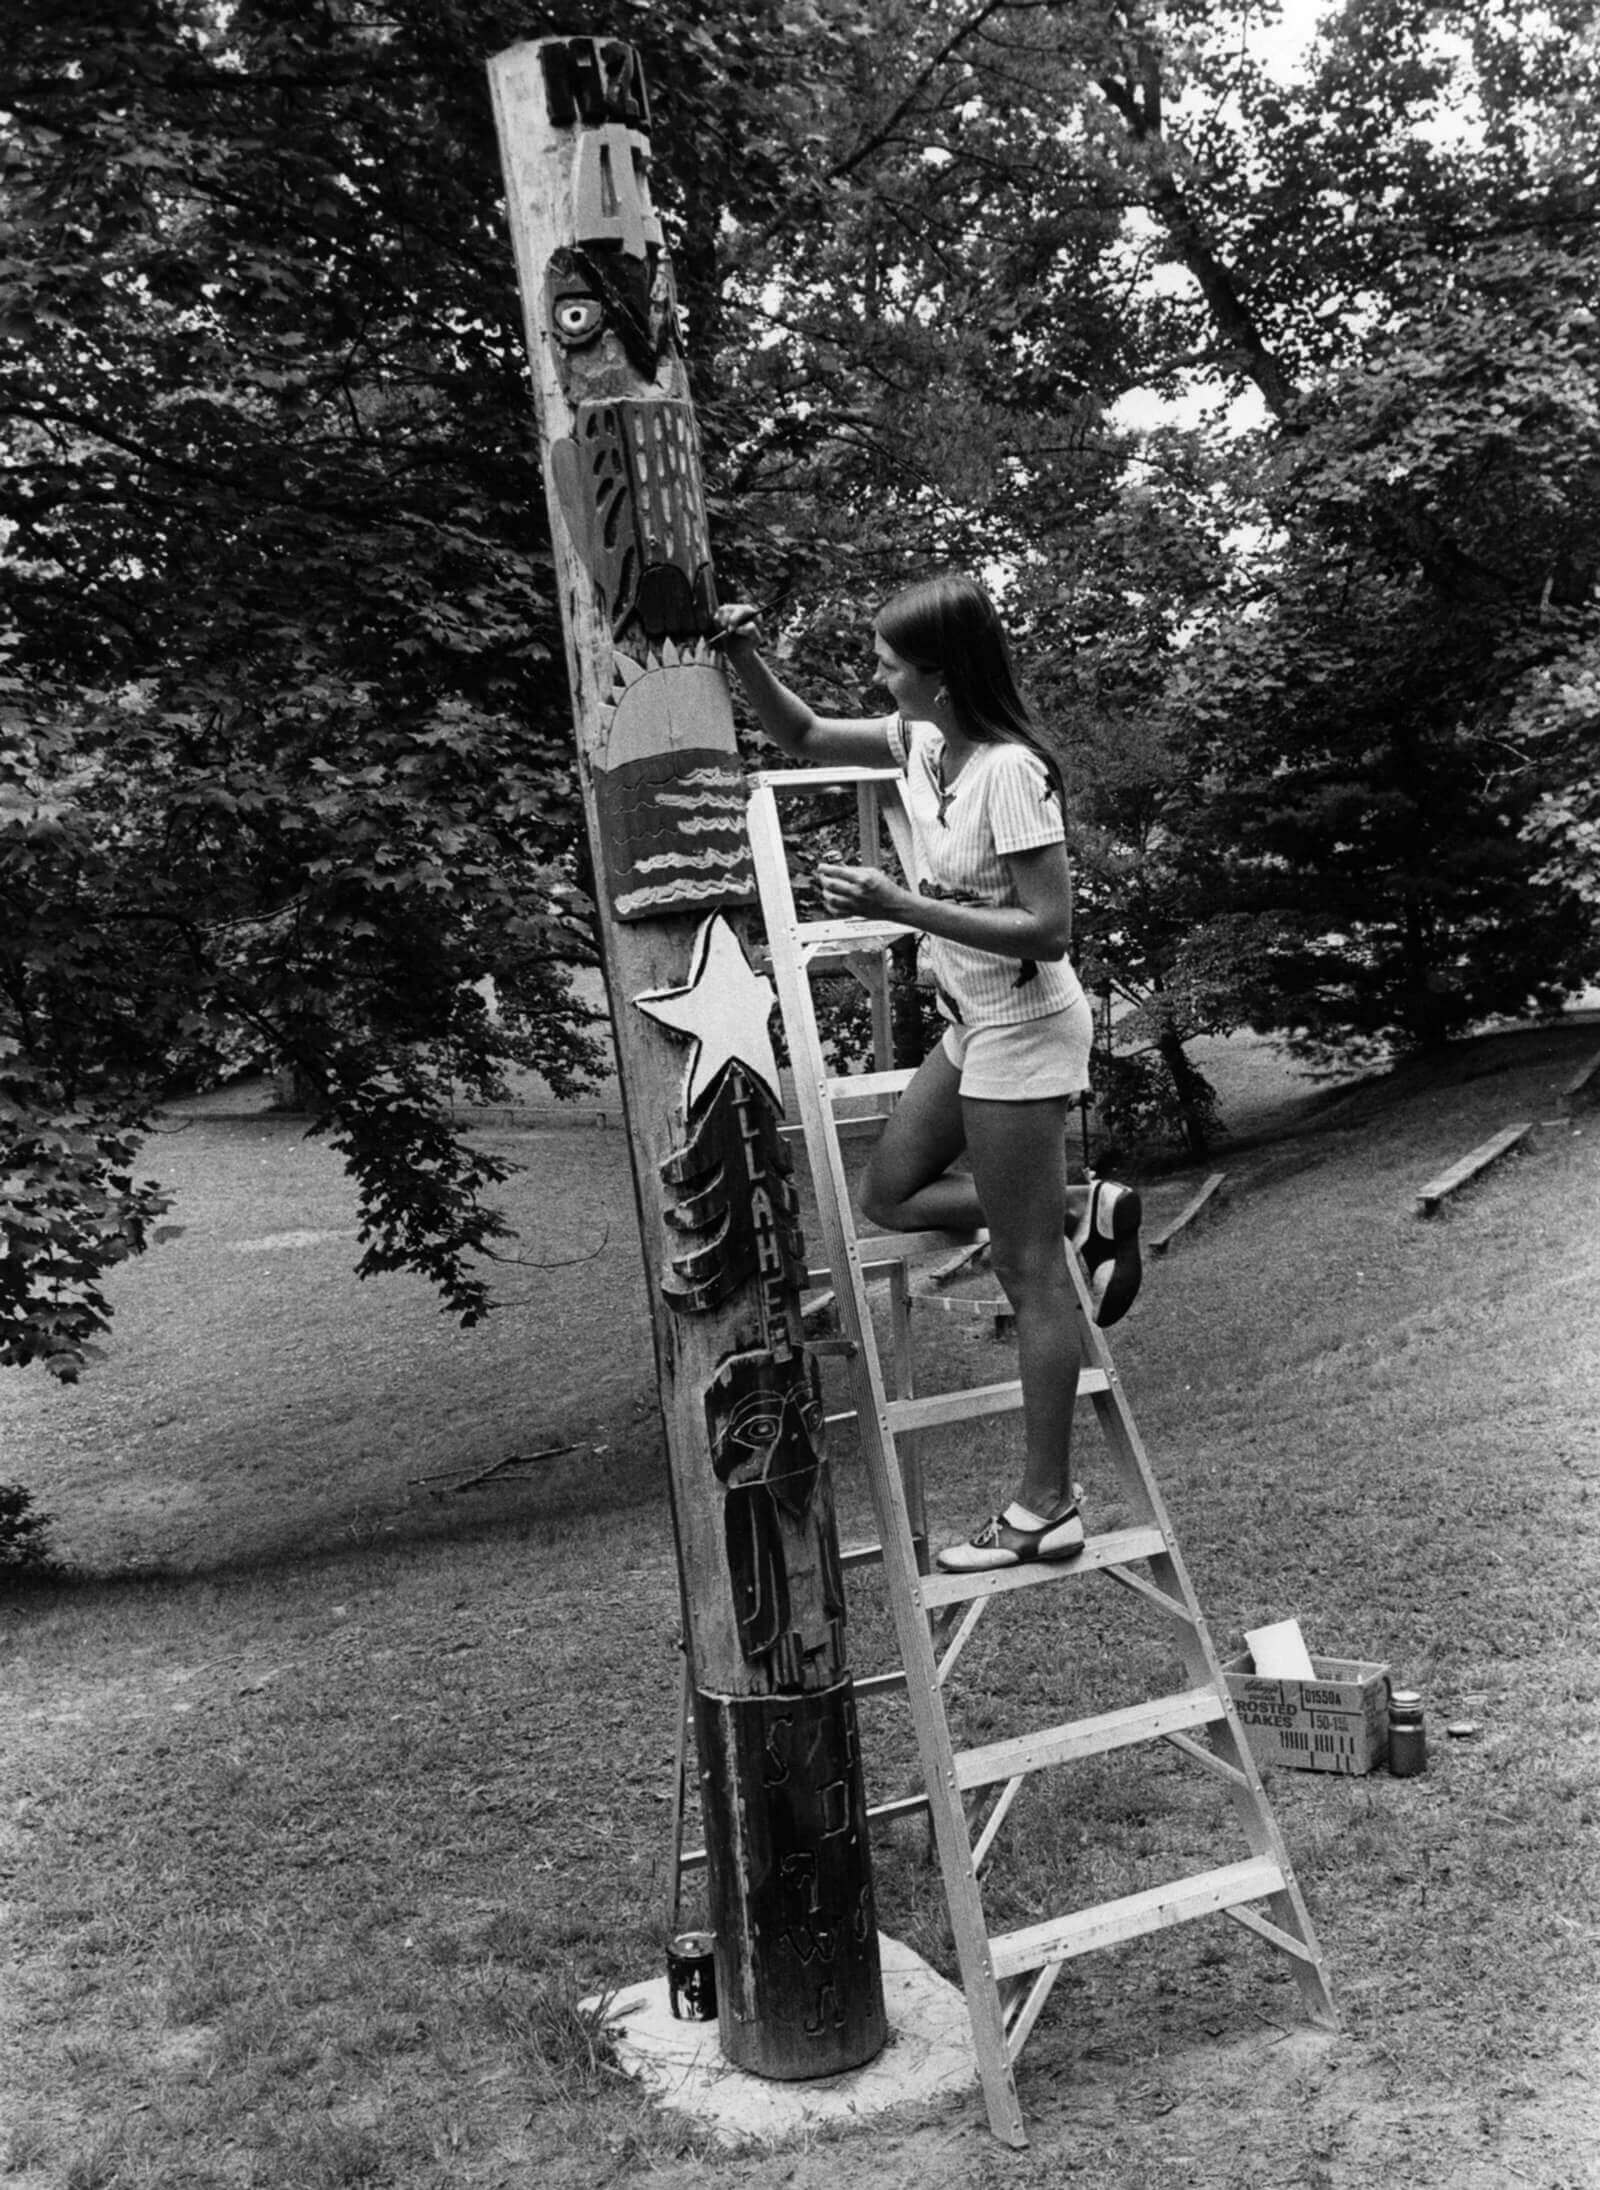 A nineteen seventies photograph of a girl decorating a supposed “totem pole” at Camp Illahee, North Carolina.